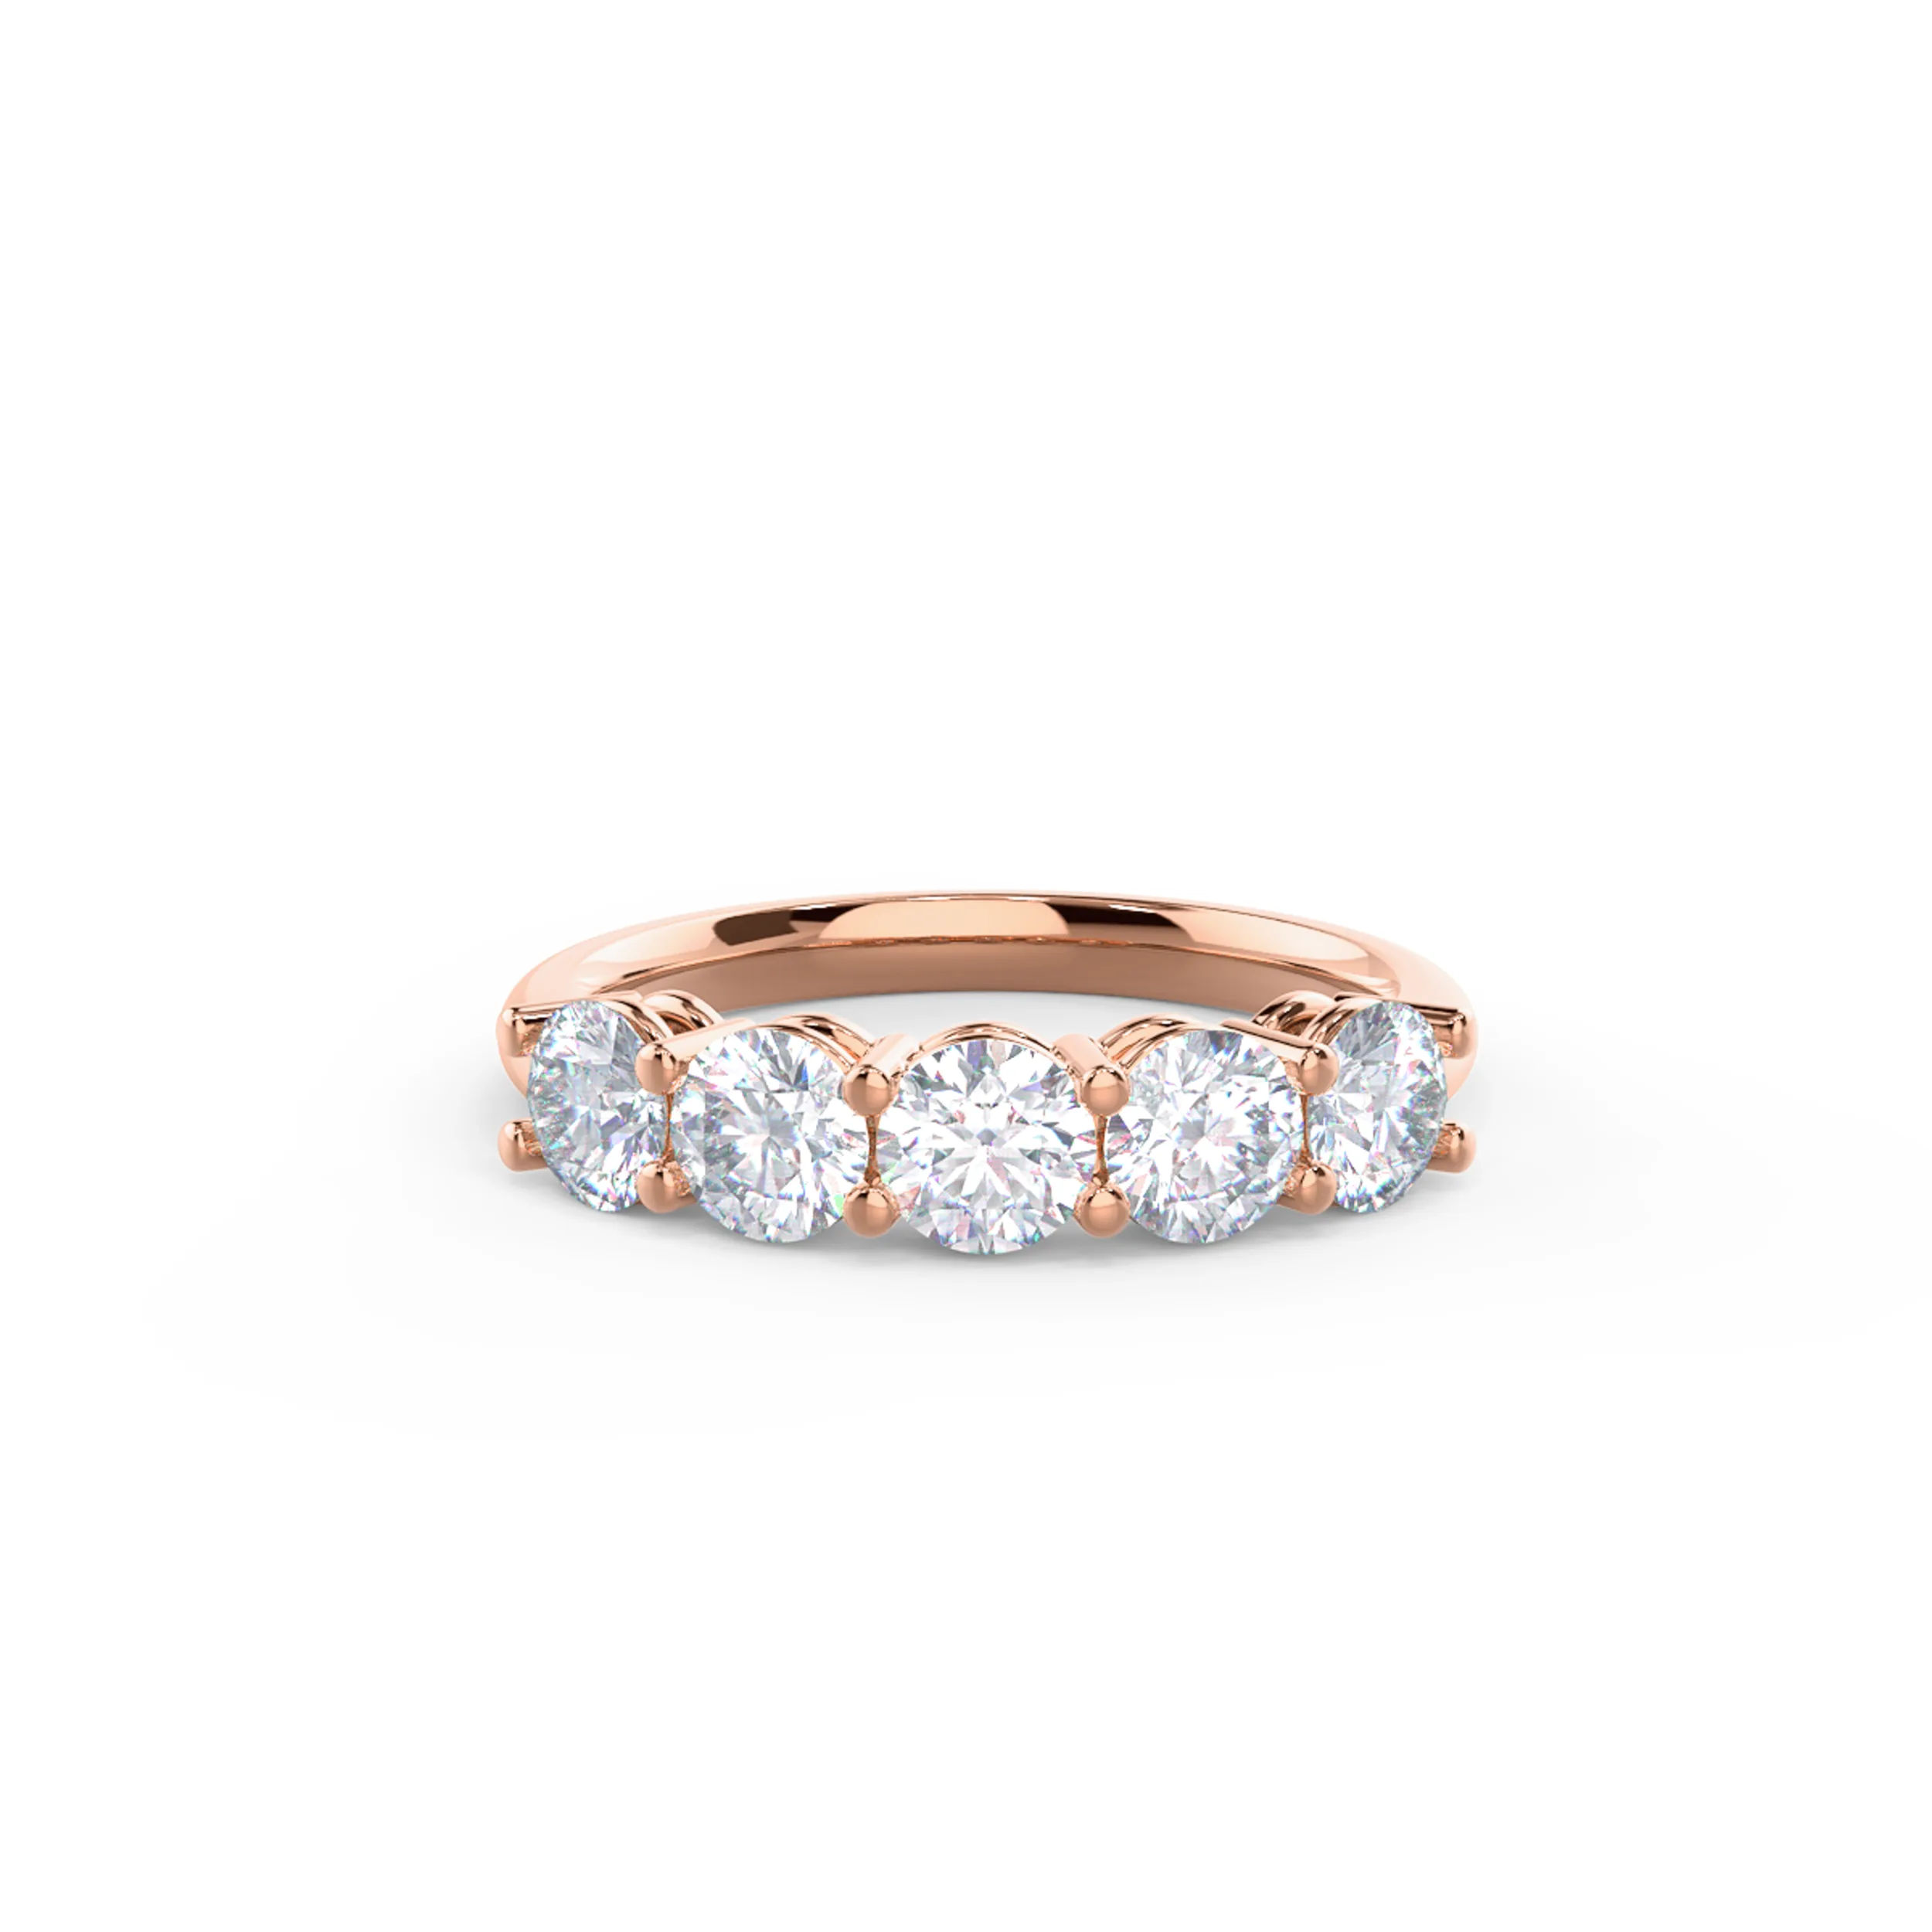 Exceptional Quality 1.5 ct Round Lab Diamonds set in 14k Rose Gold Prong Set Five Stone (Main View)